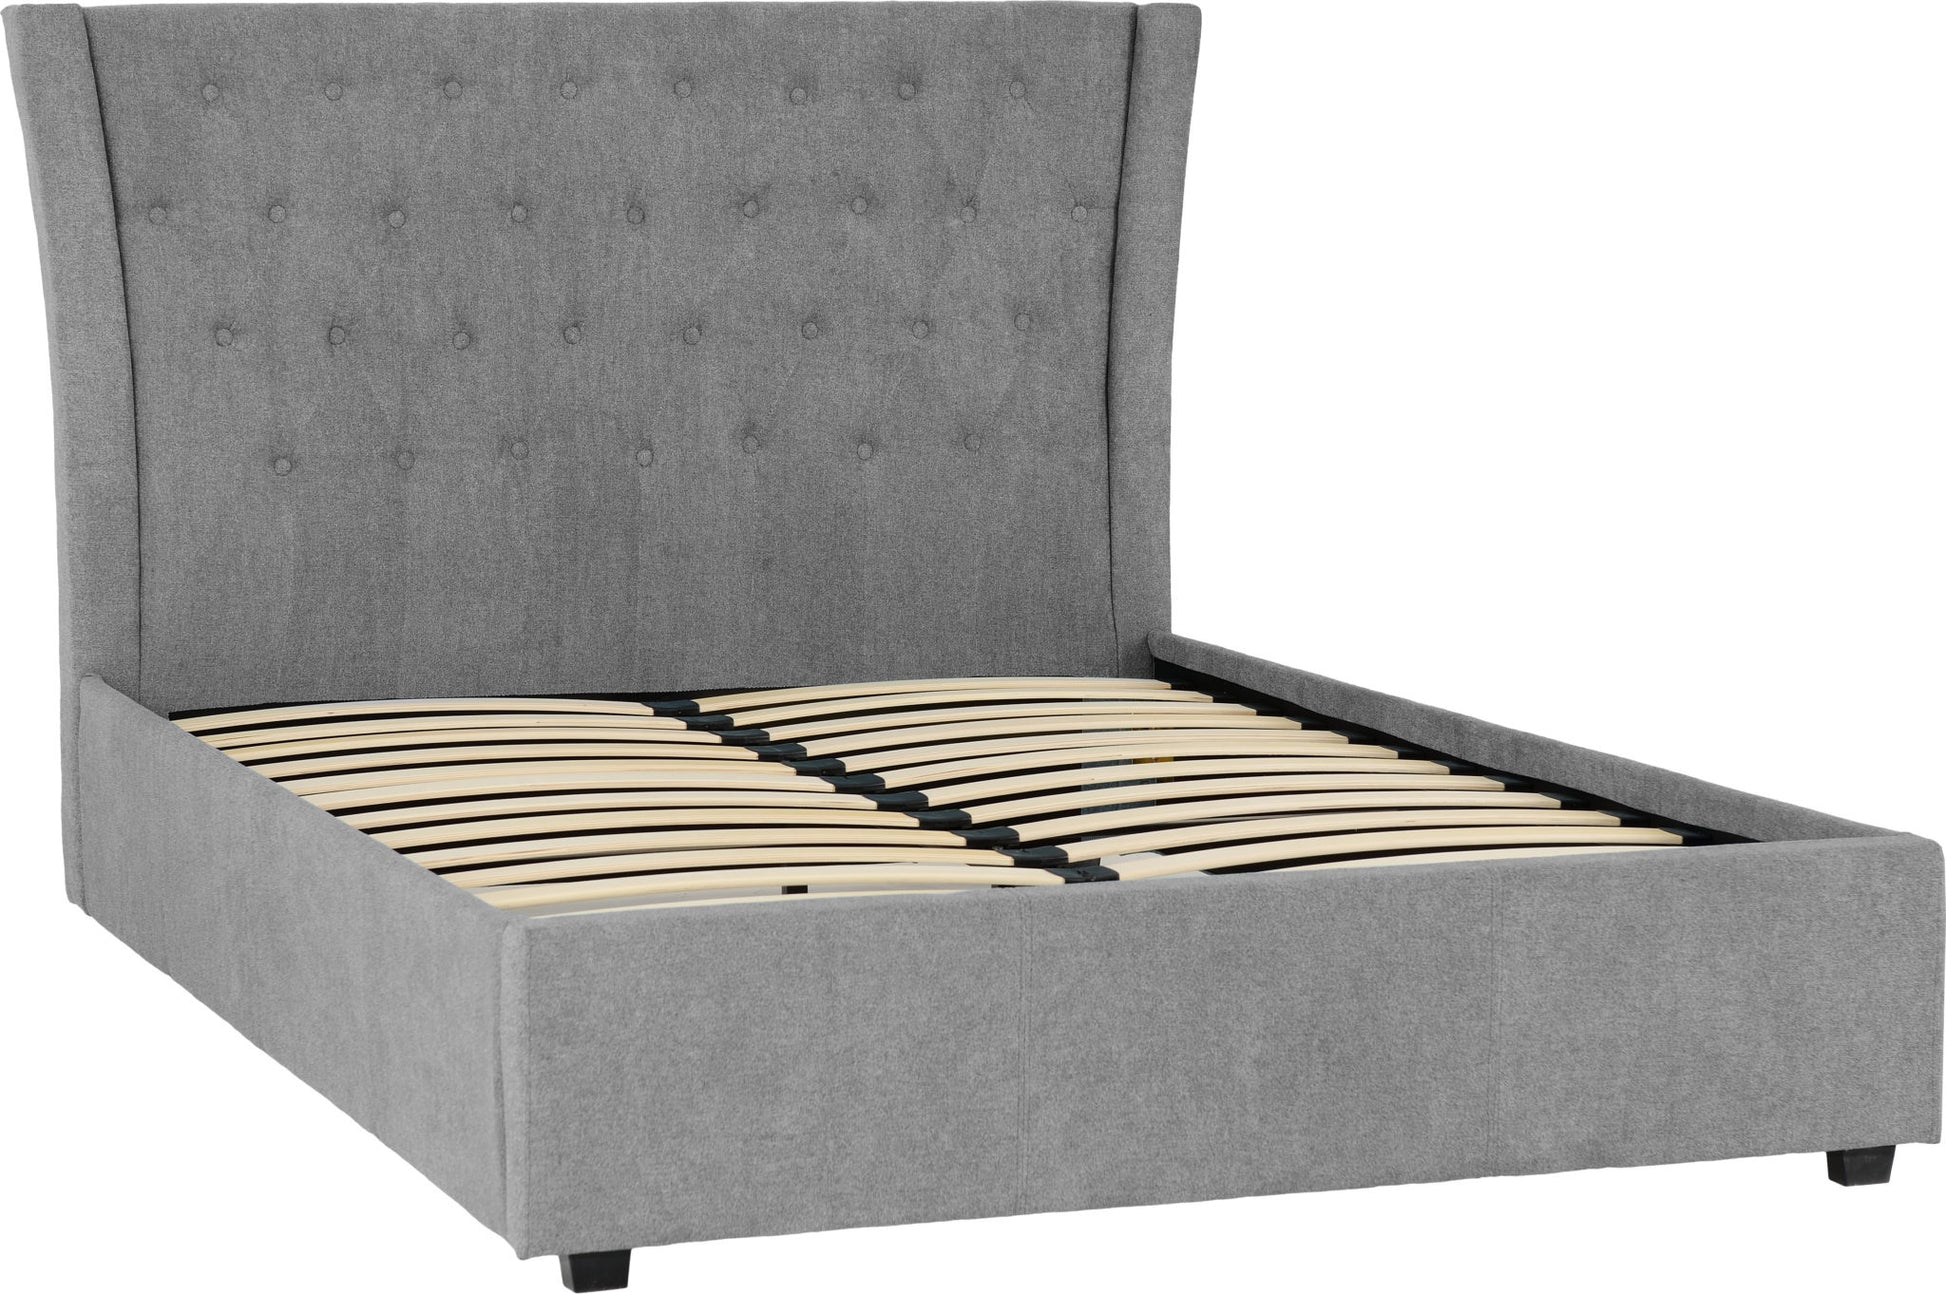 Camden 4'6" Bed - Grey Fabric - The Right Buy Store